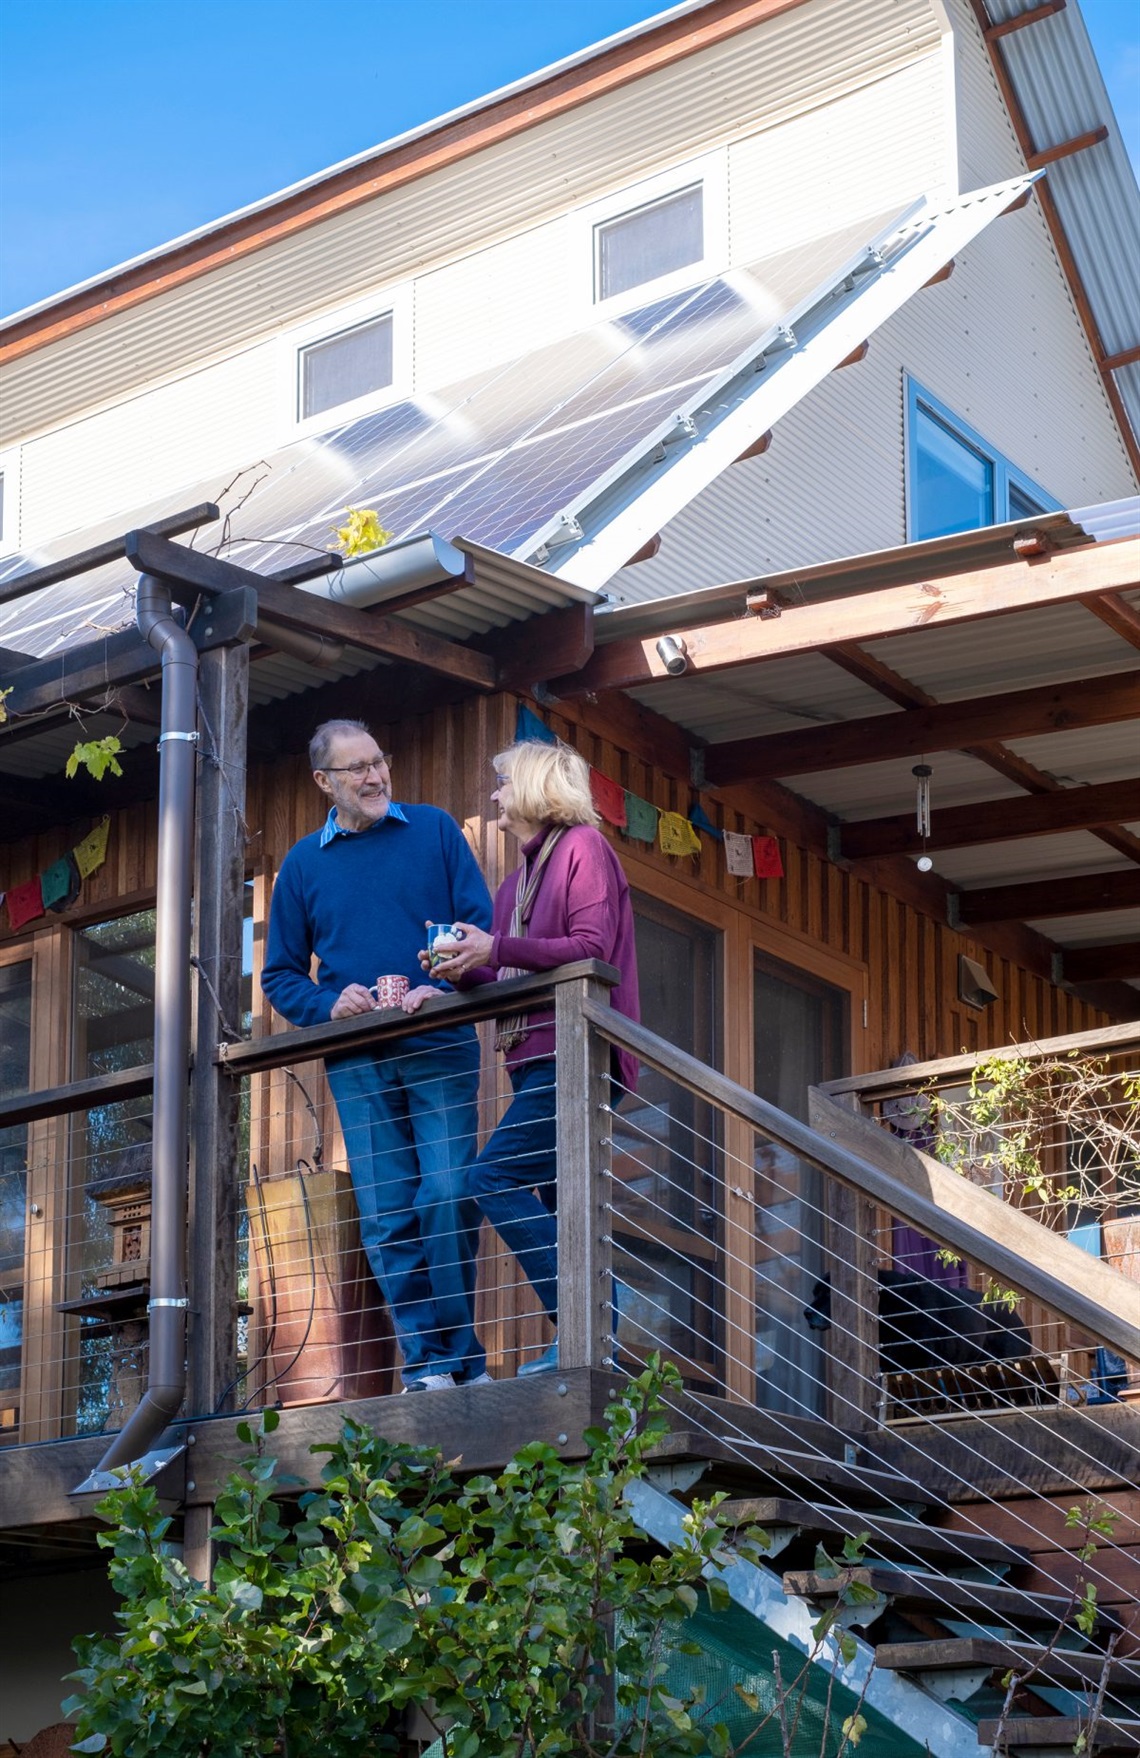 Sue Greenwood and Jason Garrood are living comfortably in their passively heated and cooled, light-filled and solar-powered home.